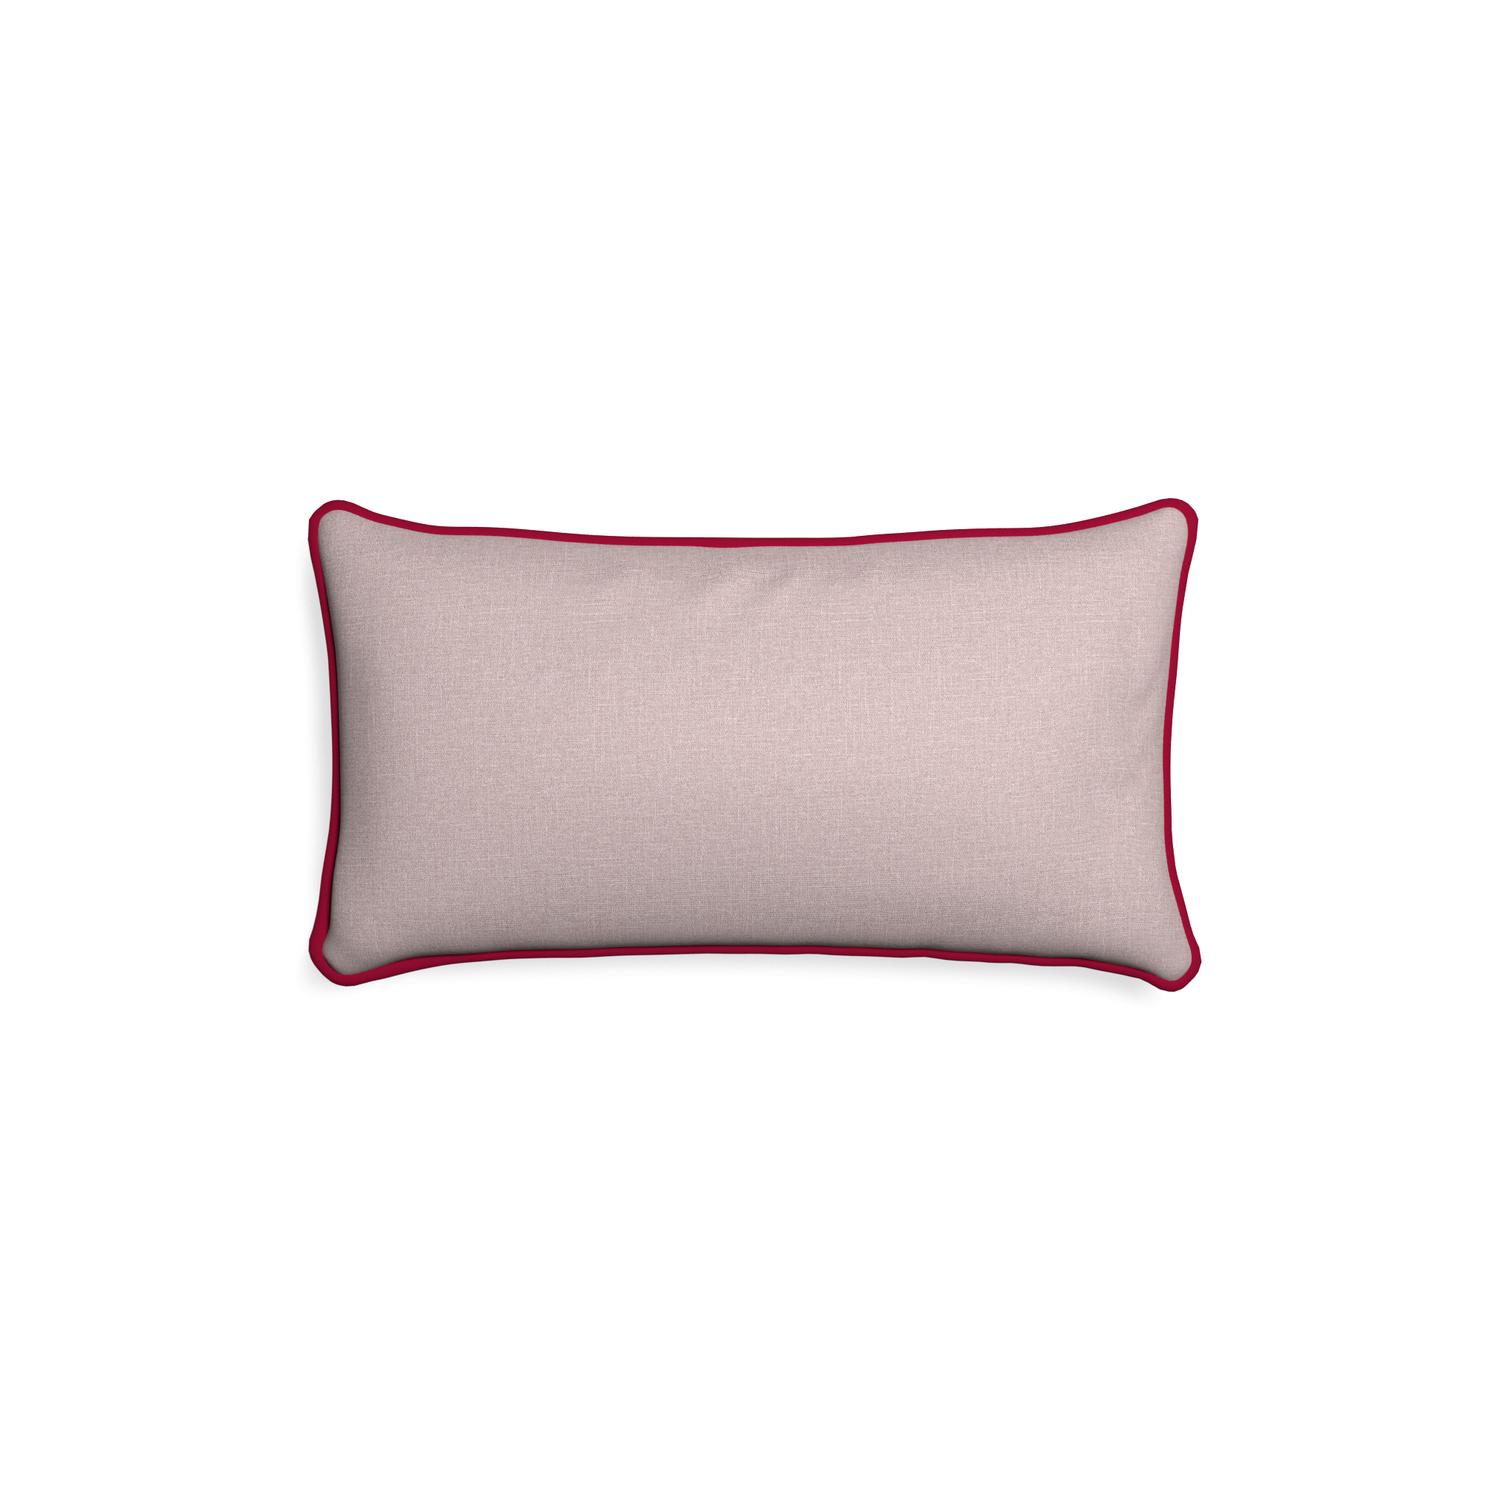 Petite-lumbar orchid custom mauve pinkpillow with raspberry piping on white background